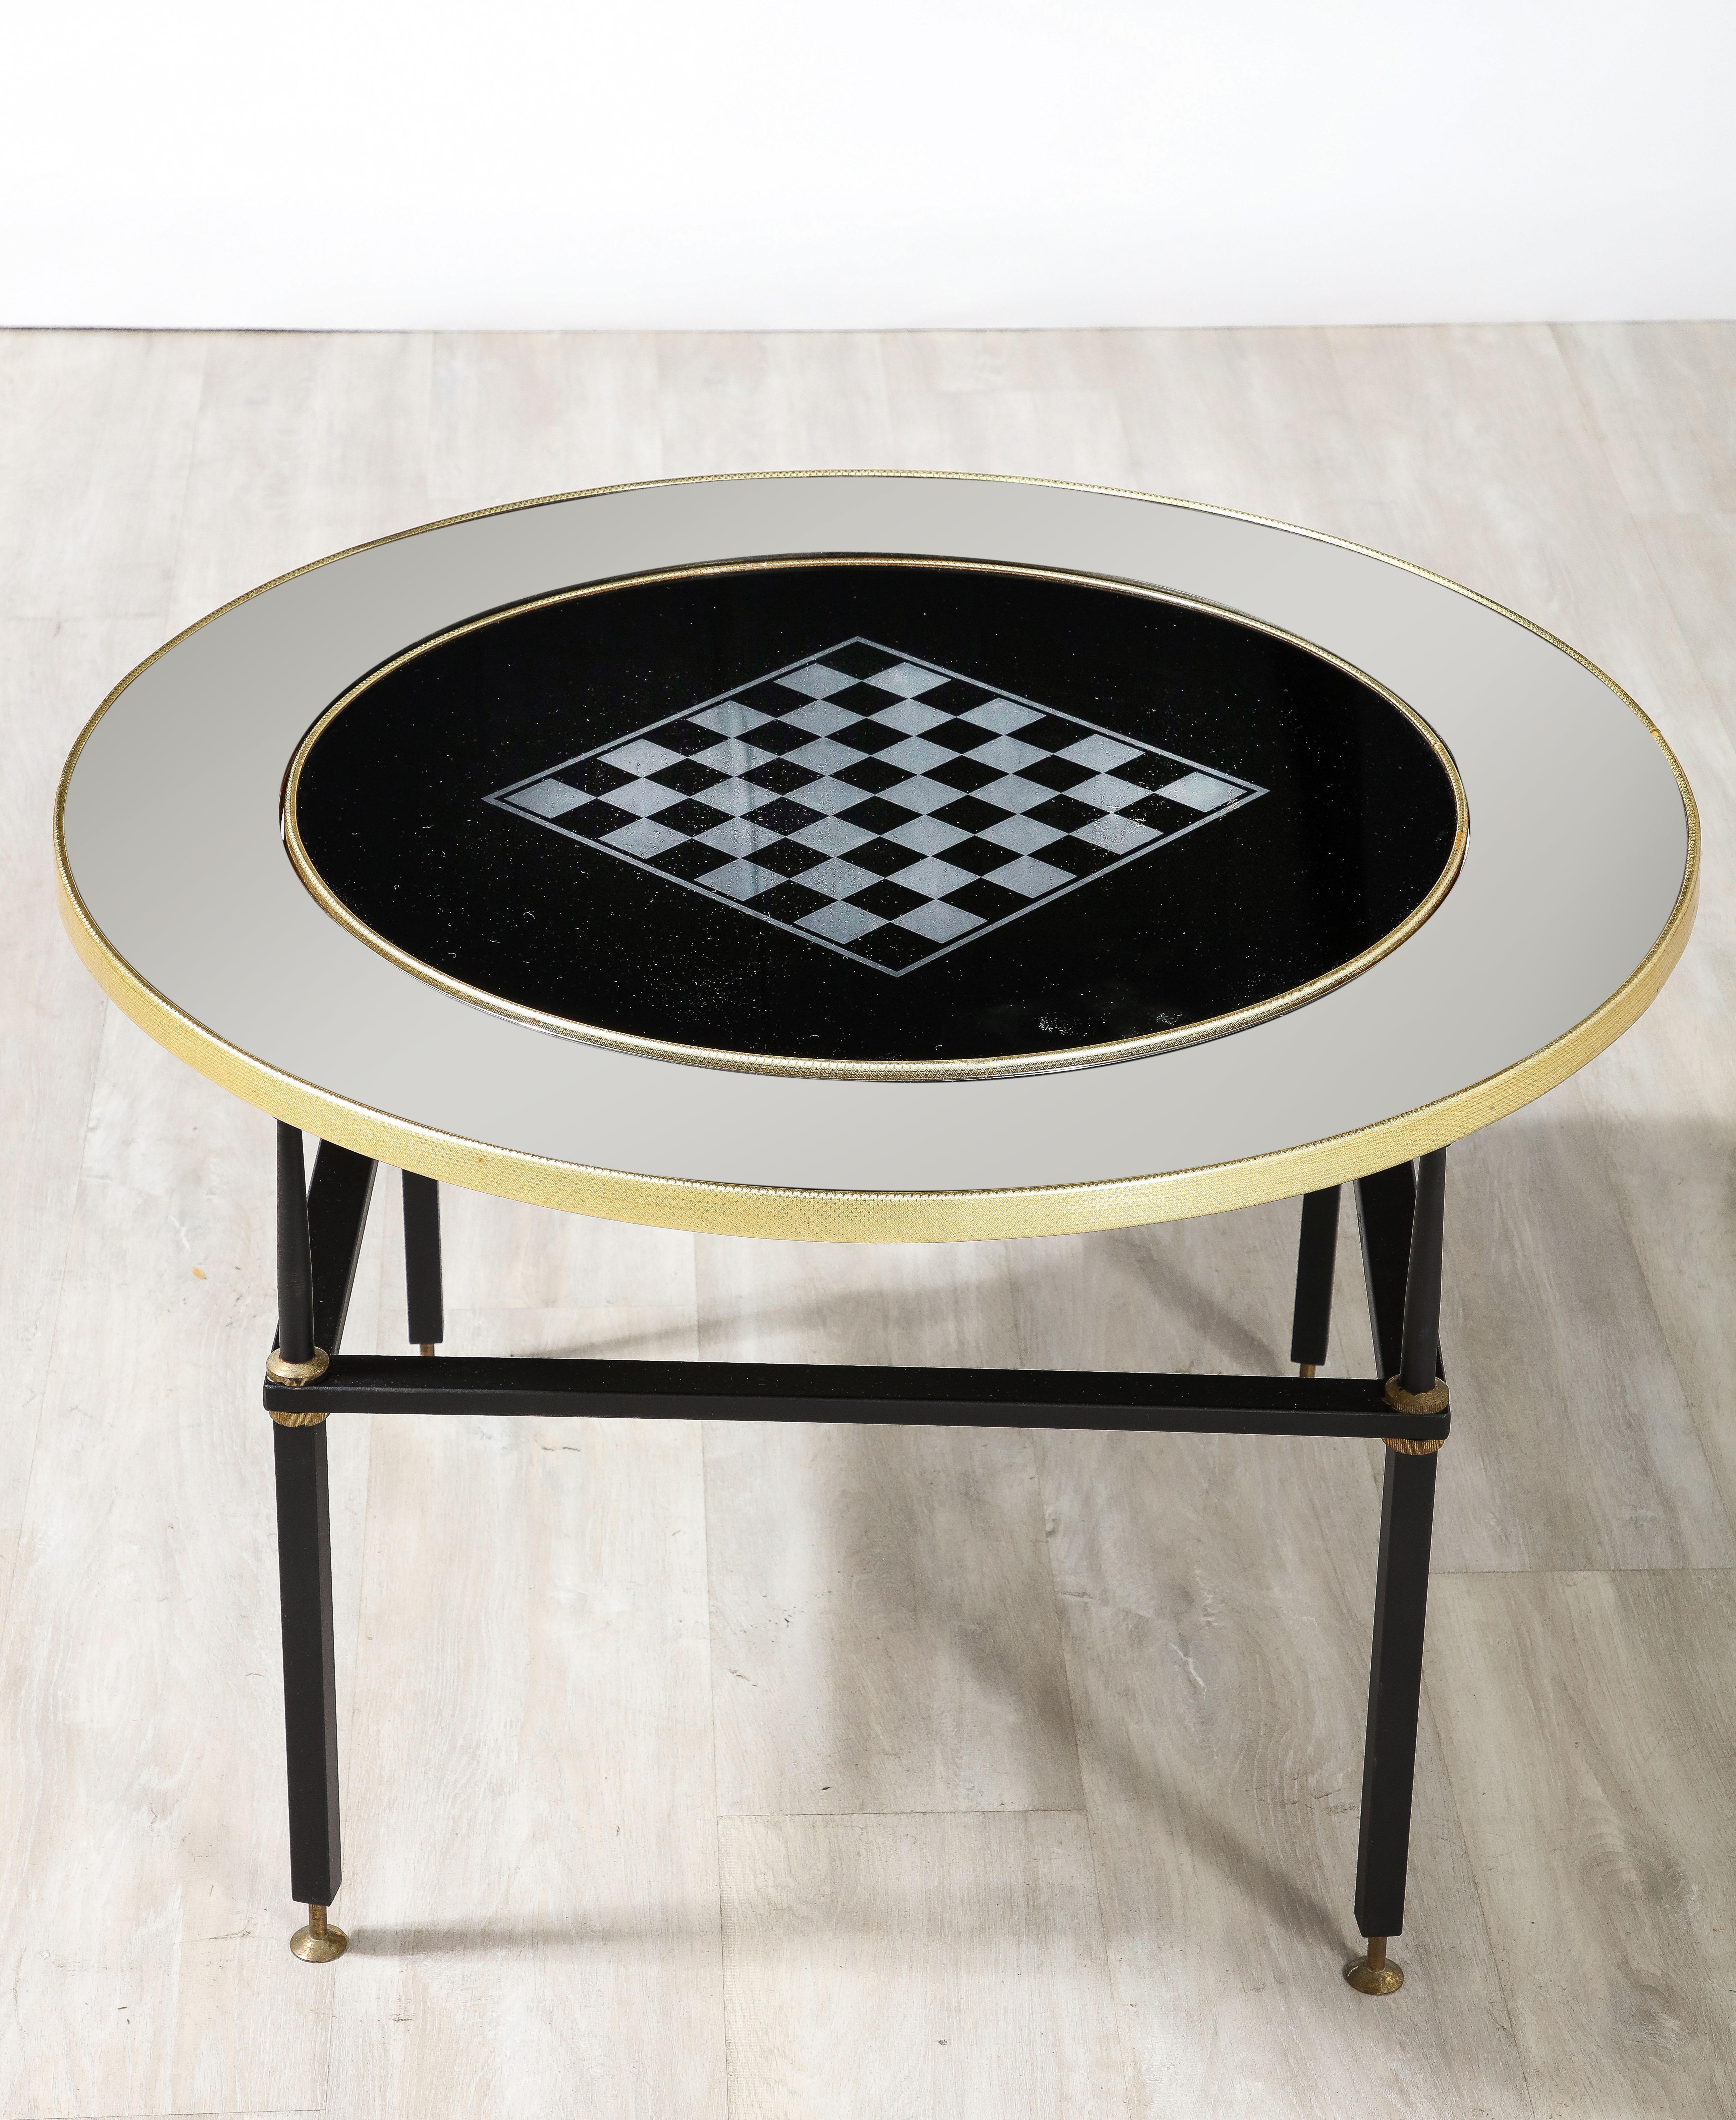 Mid-20th Century Cristal Arte Glass Table with Chess Board and Musical Motif, circa 1955 For Sale